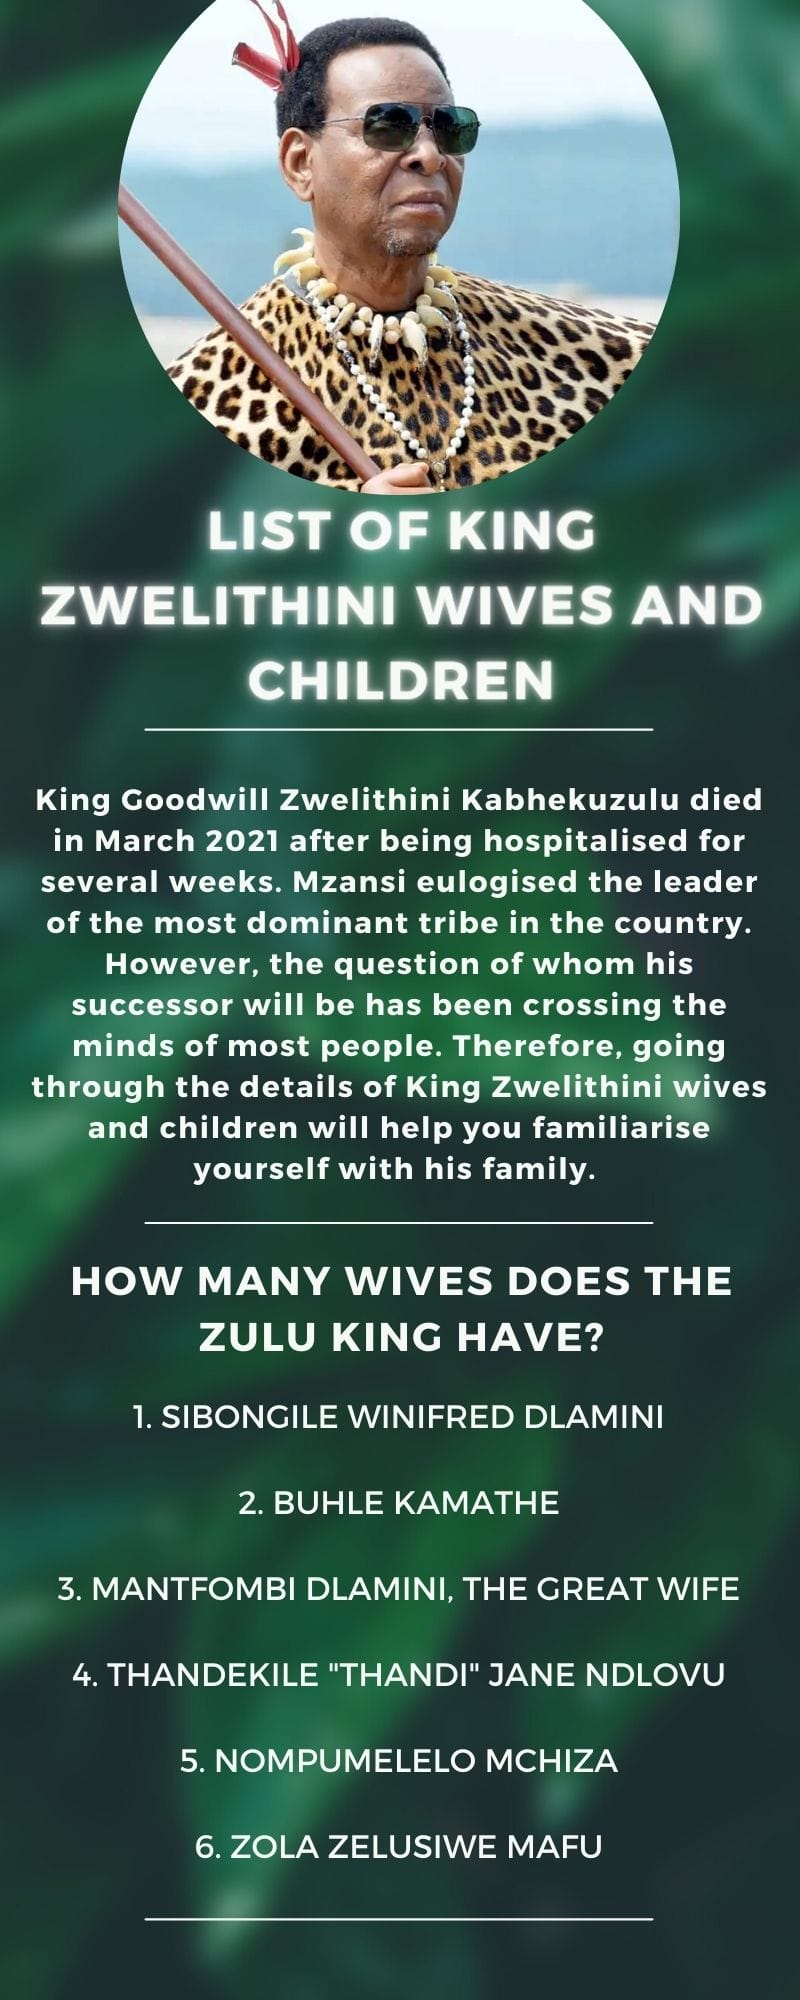 List of King Zwelithini wives and children